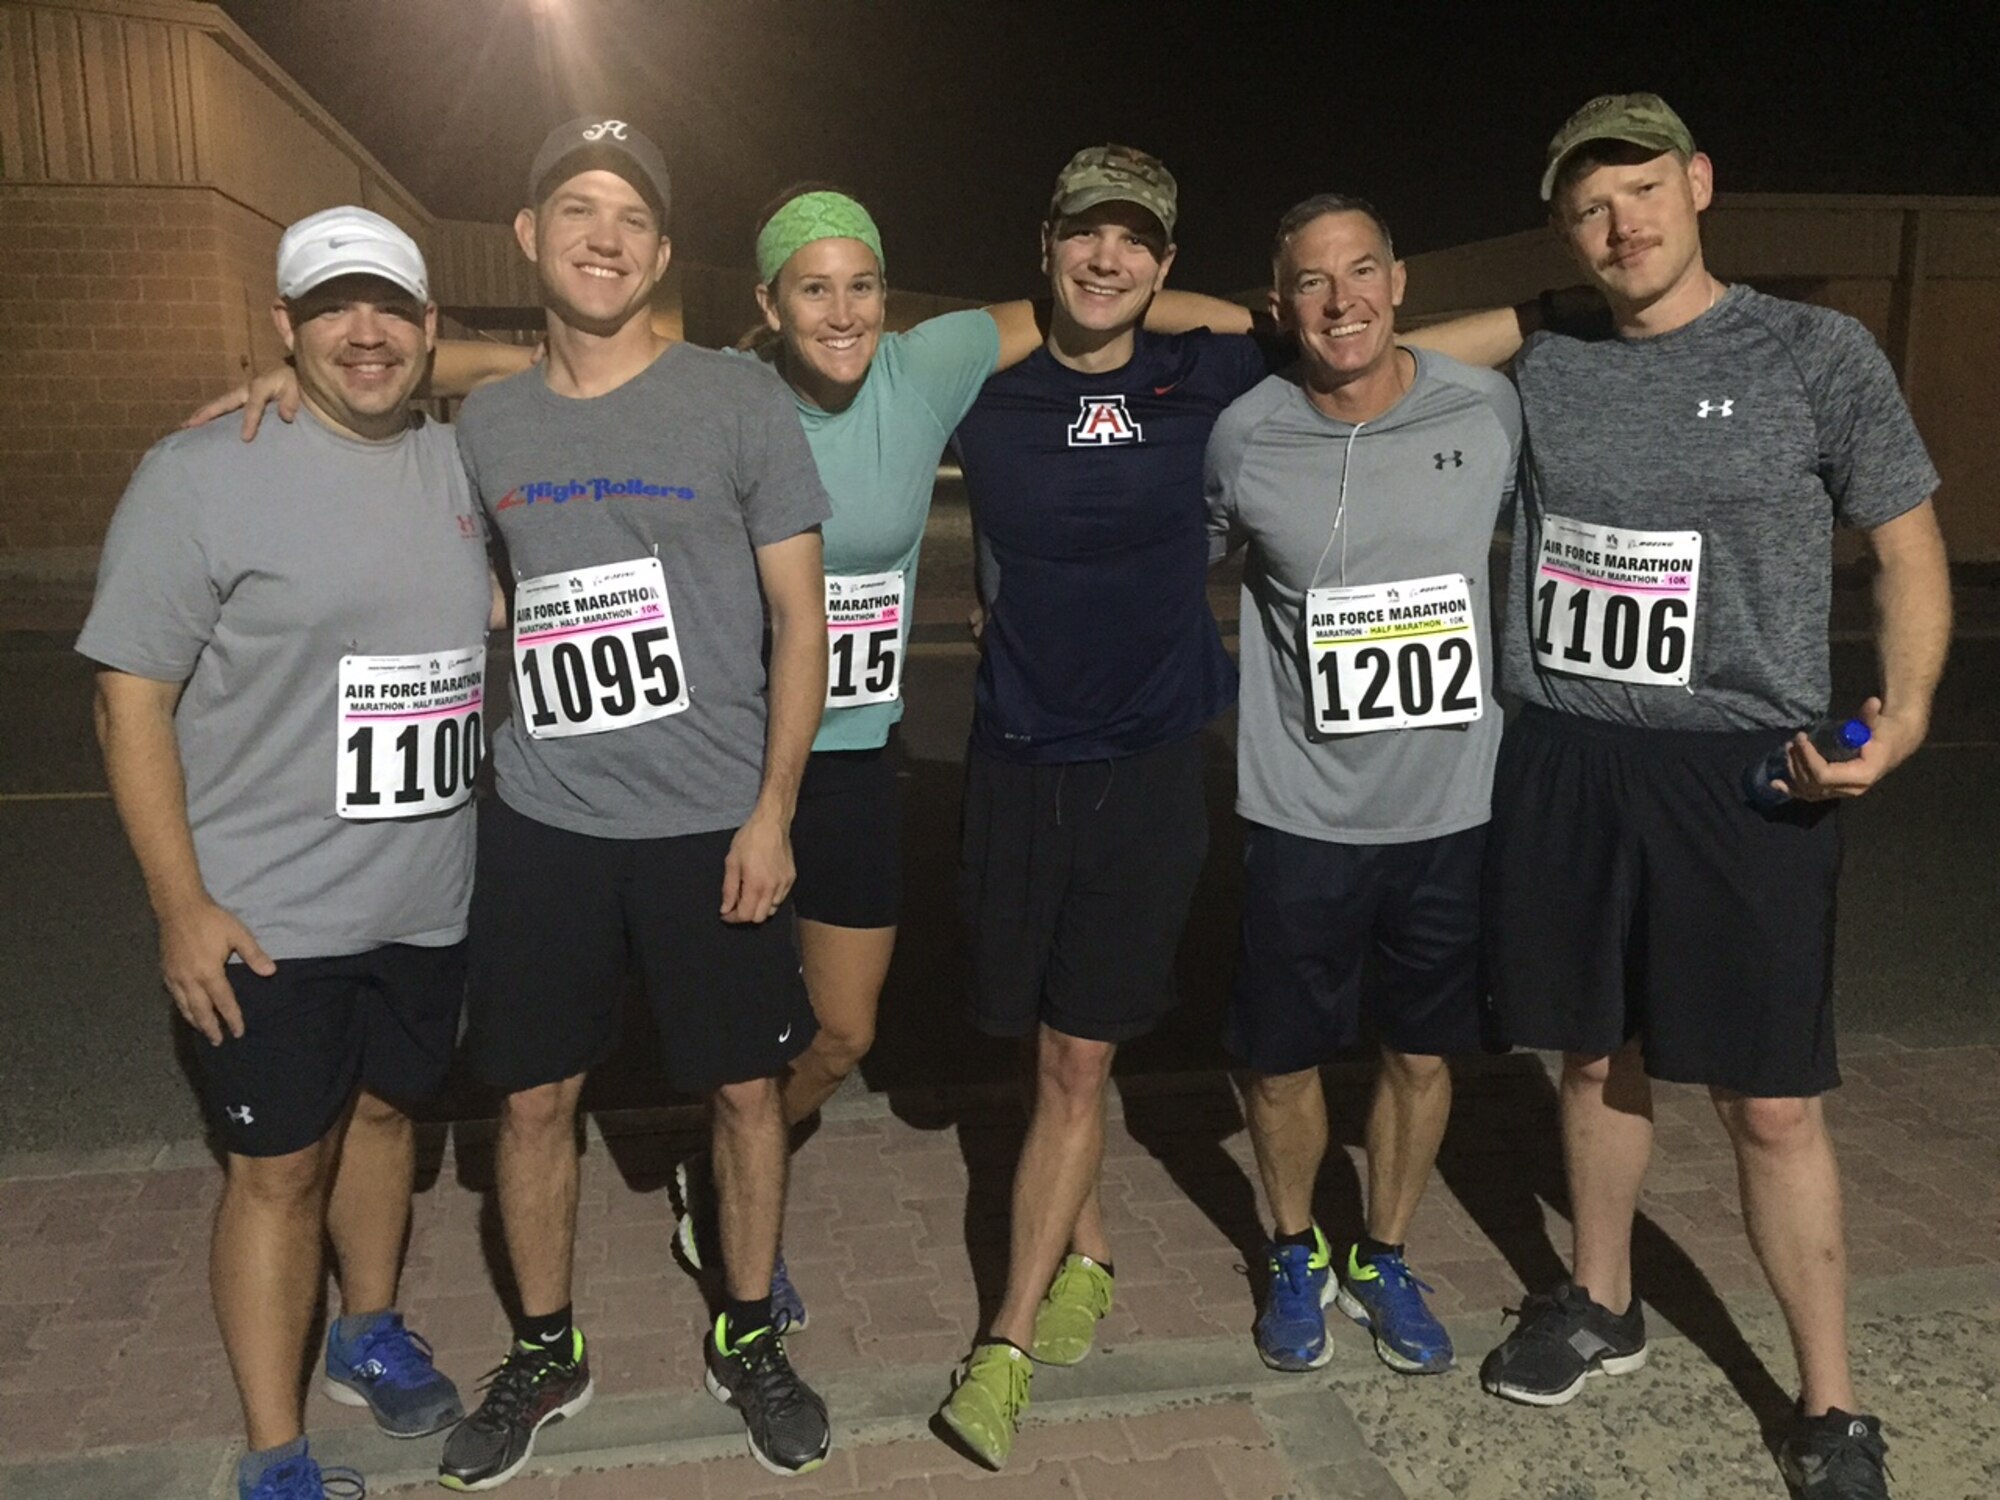 High Roller Deployers, (from left to right), Maj. Jason Little, Master Sgt. Lyle Smith, Capt. Merridy Stephenson, Capt. Reed Kobernick, Chief Master Sgt. Thomas Glover and Capt. Kyle Carraher who all participated in the Deployed Air Force Marathon. Some competed in the Half-Marathon and some competed in the 10K. Stephenson won the female 10K race. (Photo by a unnamed volunteer.)